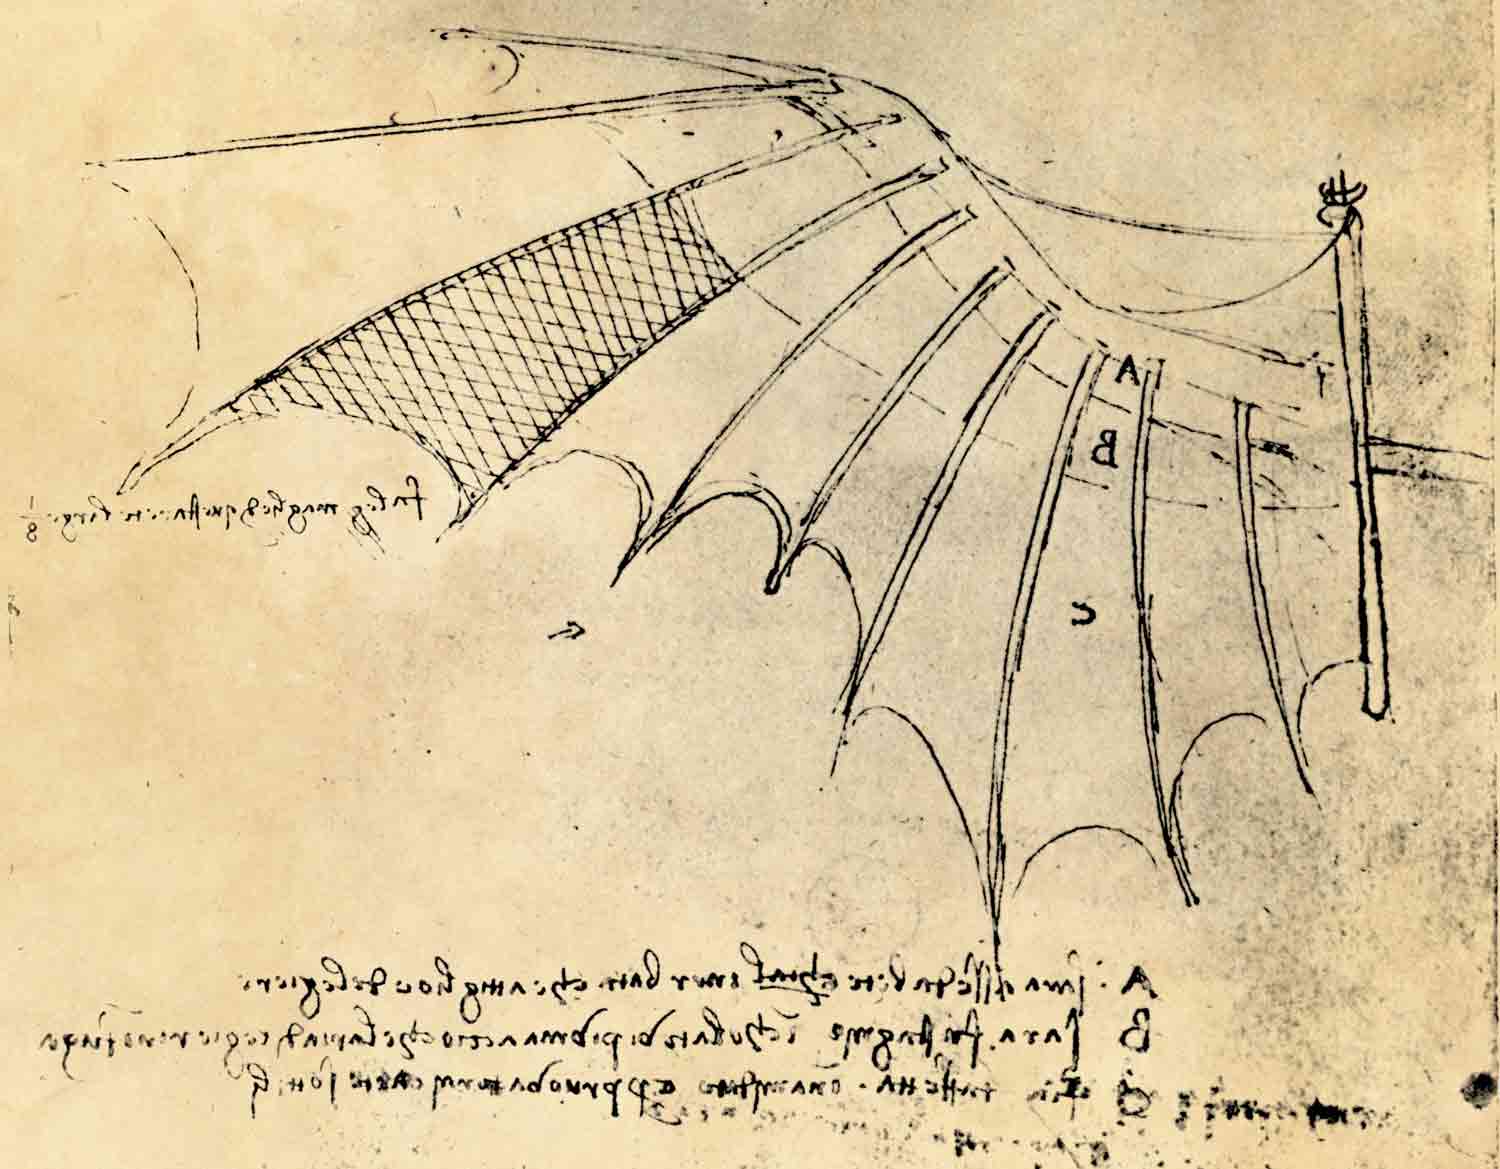 Leonardo da Vinci’s illustration of his flying machine with parts labeled in mirror writing.